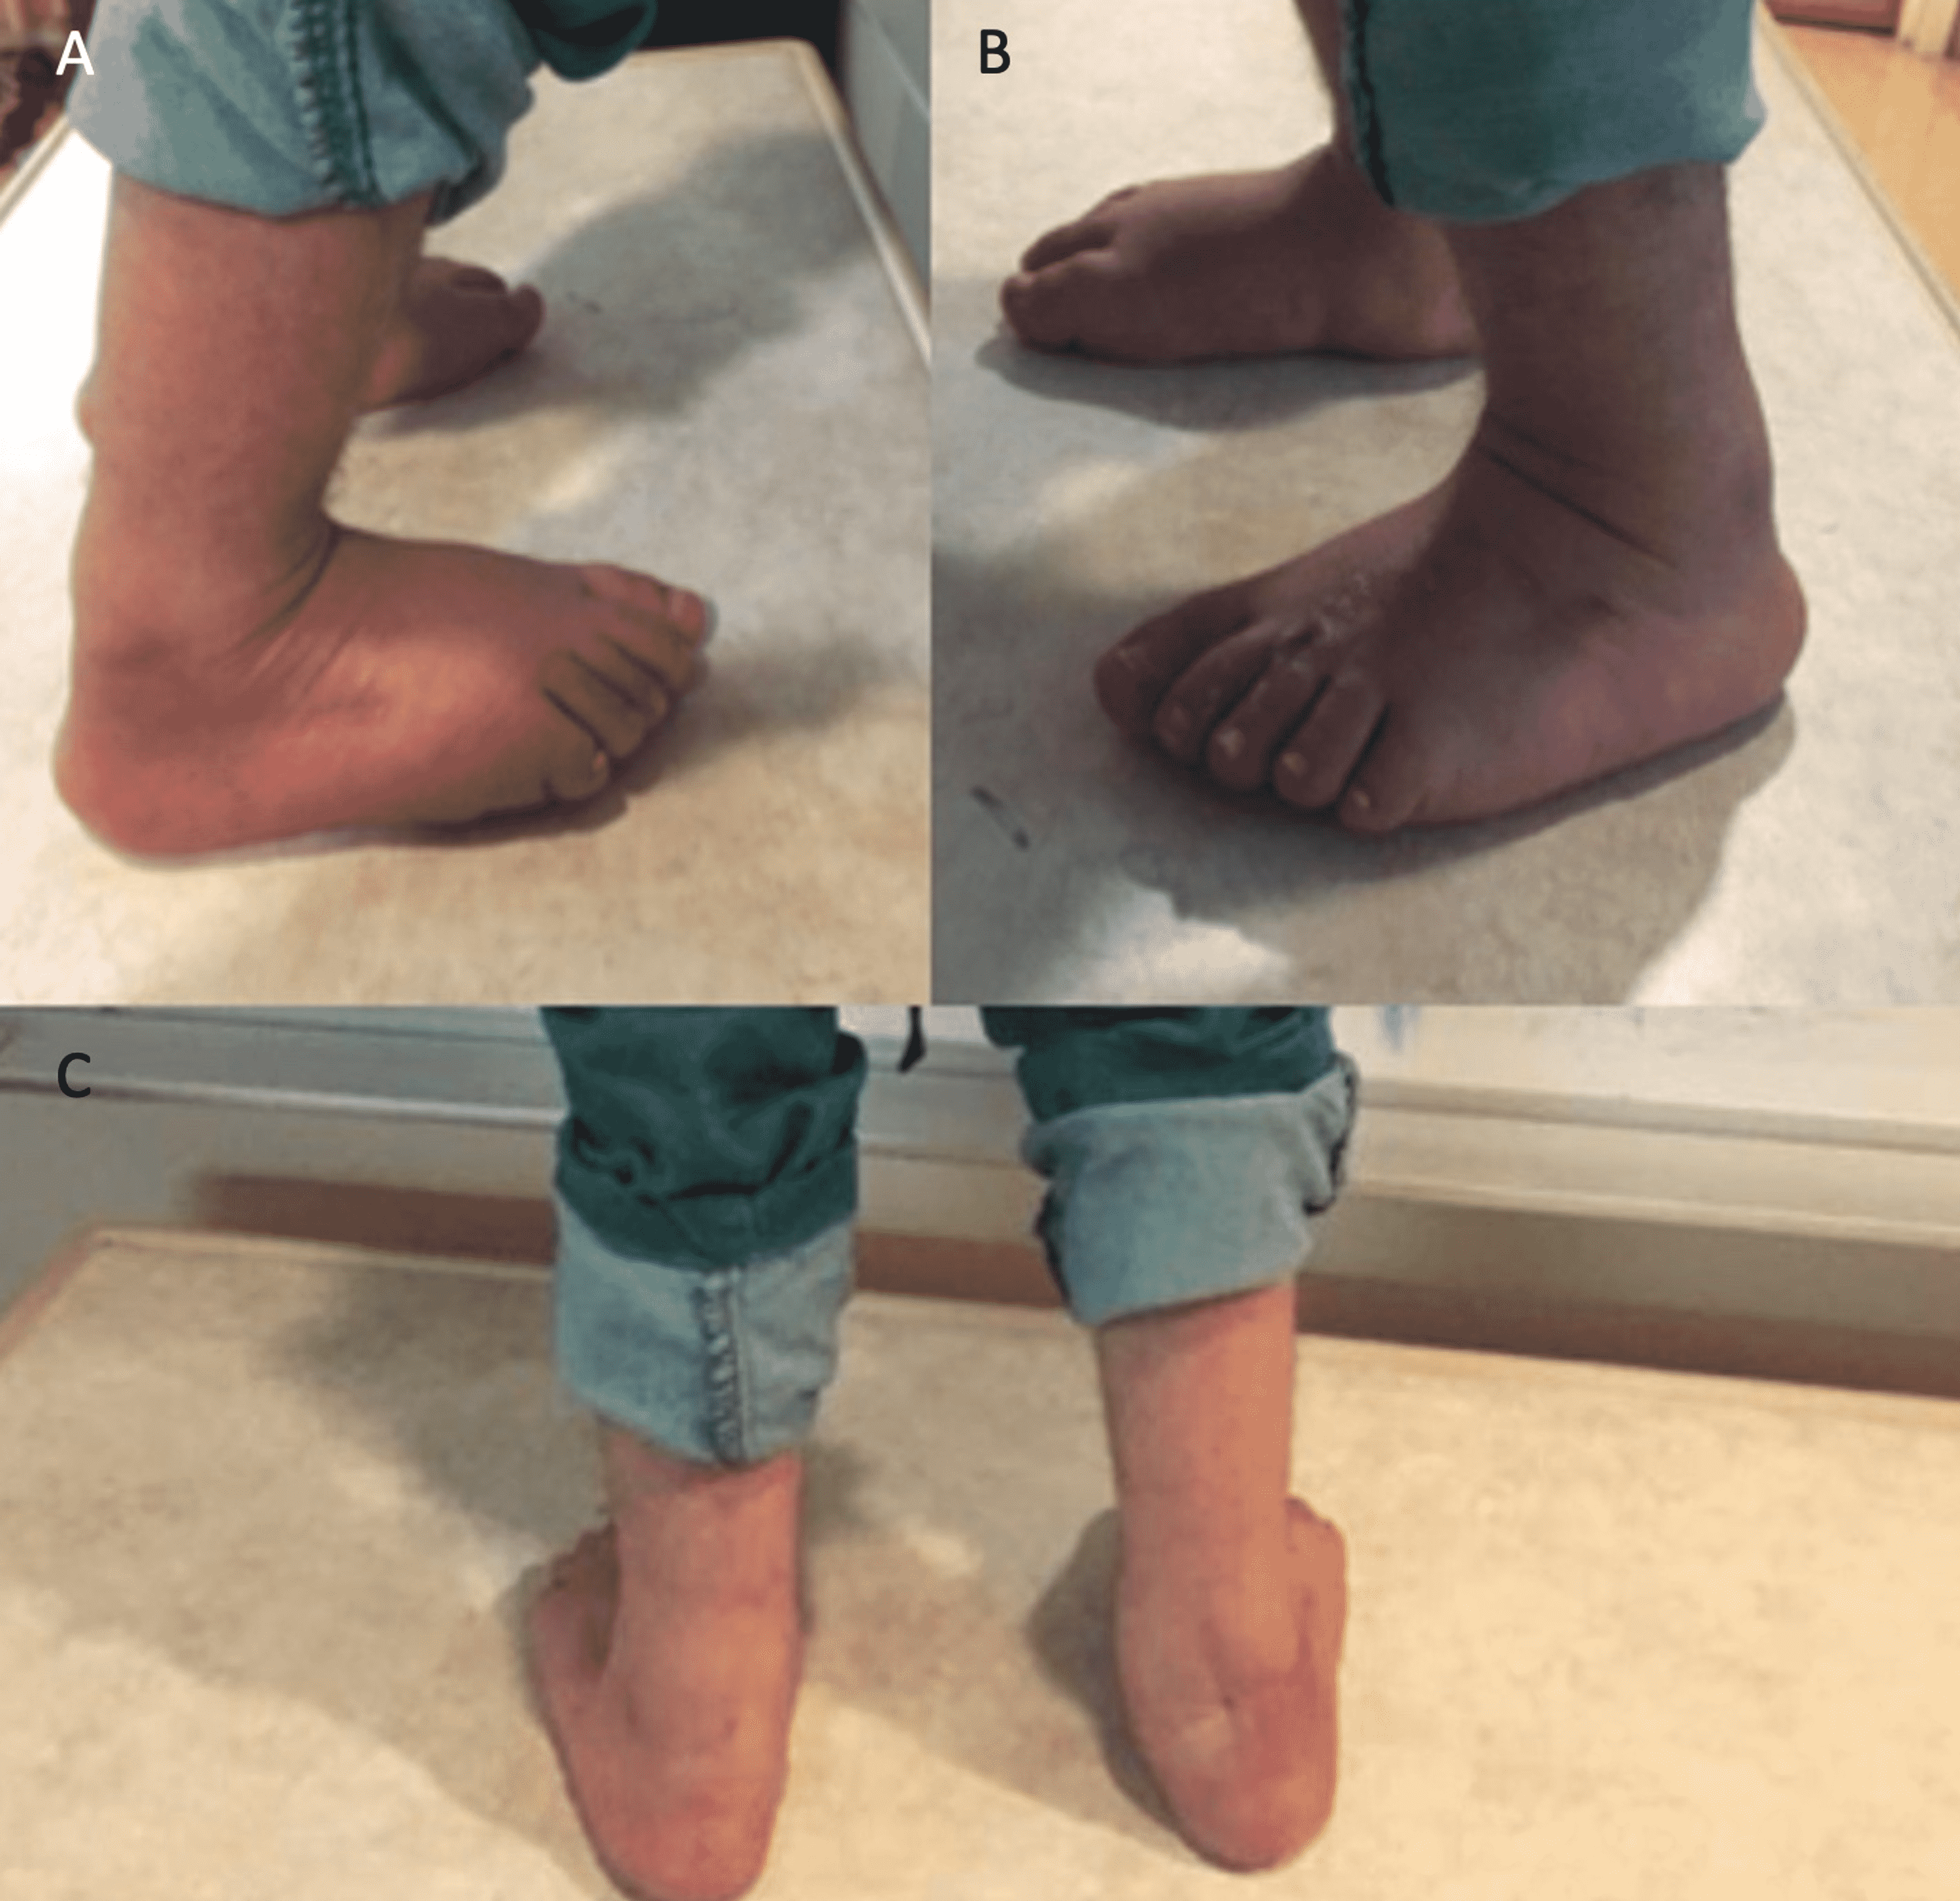 Cureus Targeted Minimally Invasive Percutaneous Posteromedial Release Of Residual Clubfoot In Myelomeningocele Patients A Report Of Two Cases